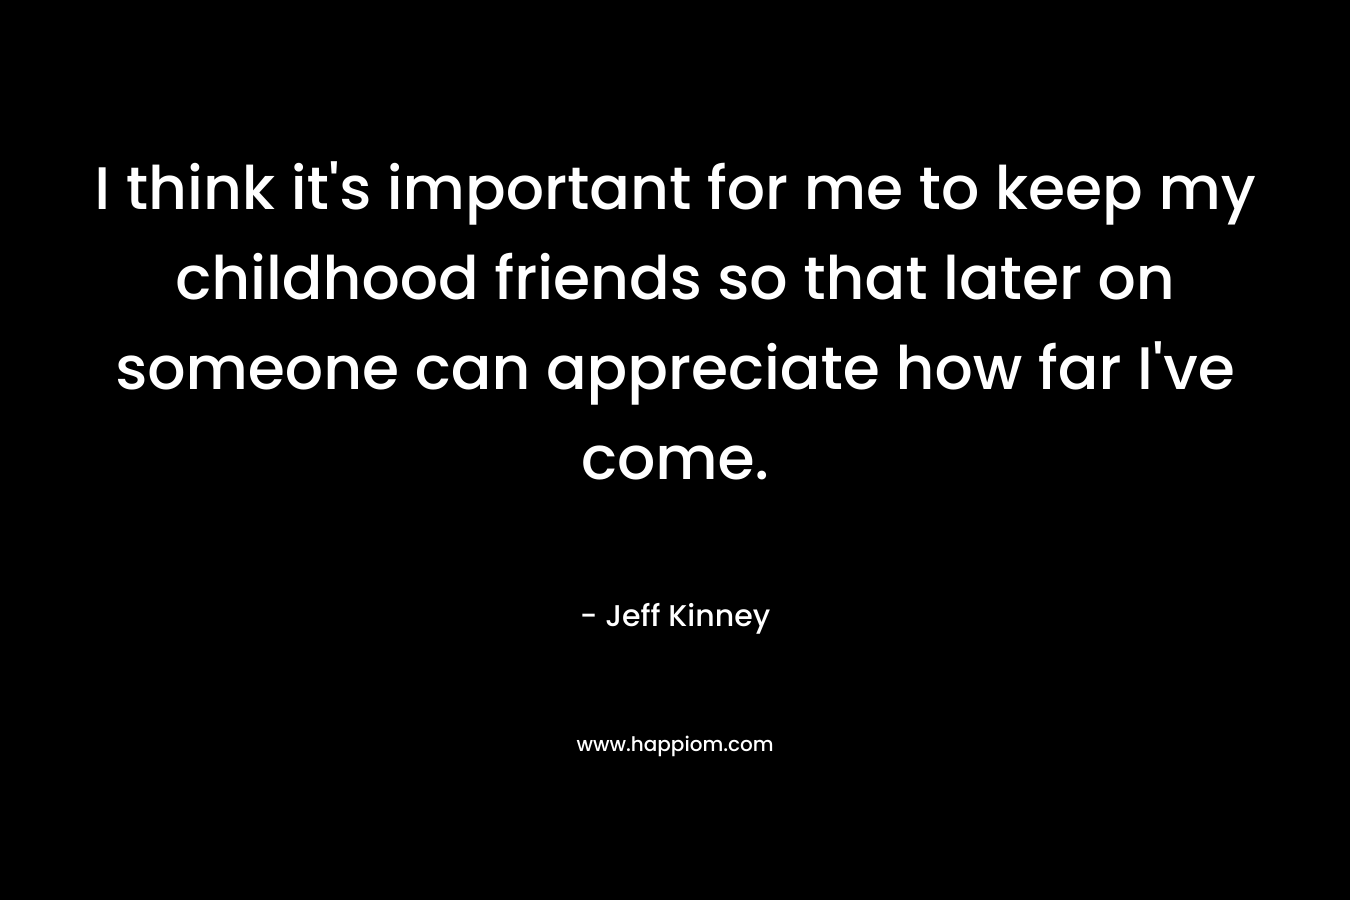 I think it’s important for me to keep my childhood friends so that later on someone can appreciate how far I’ve come. – Jeff Kinney